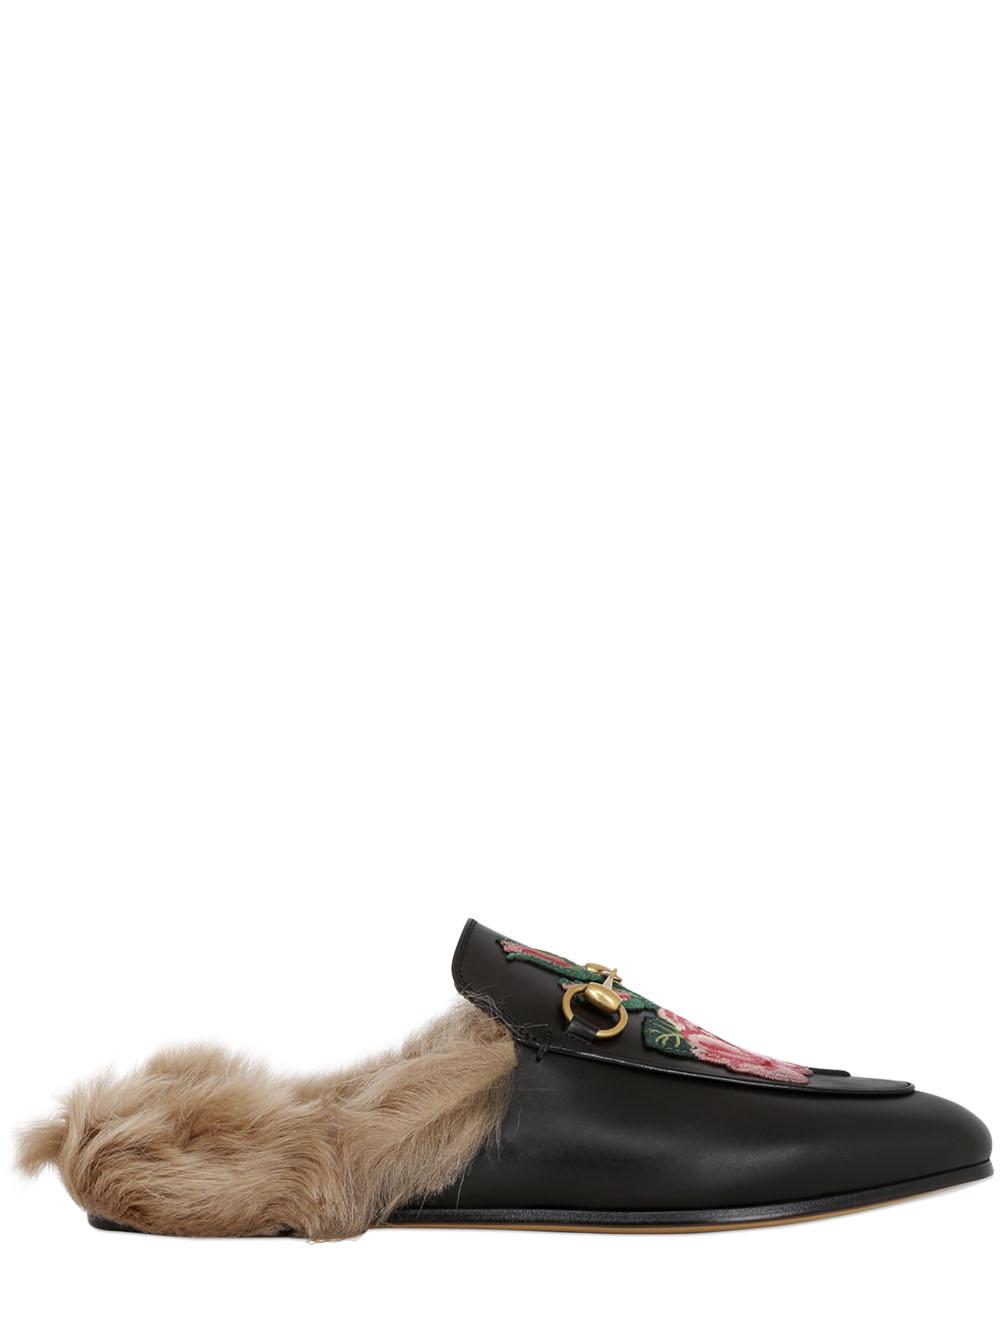 Gucci Princetown Bow Fur-lined Mule in Black - Lyst